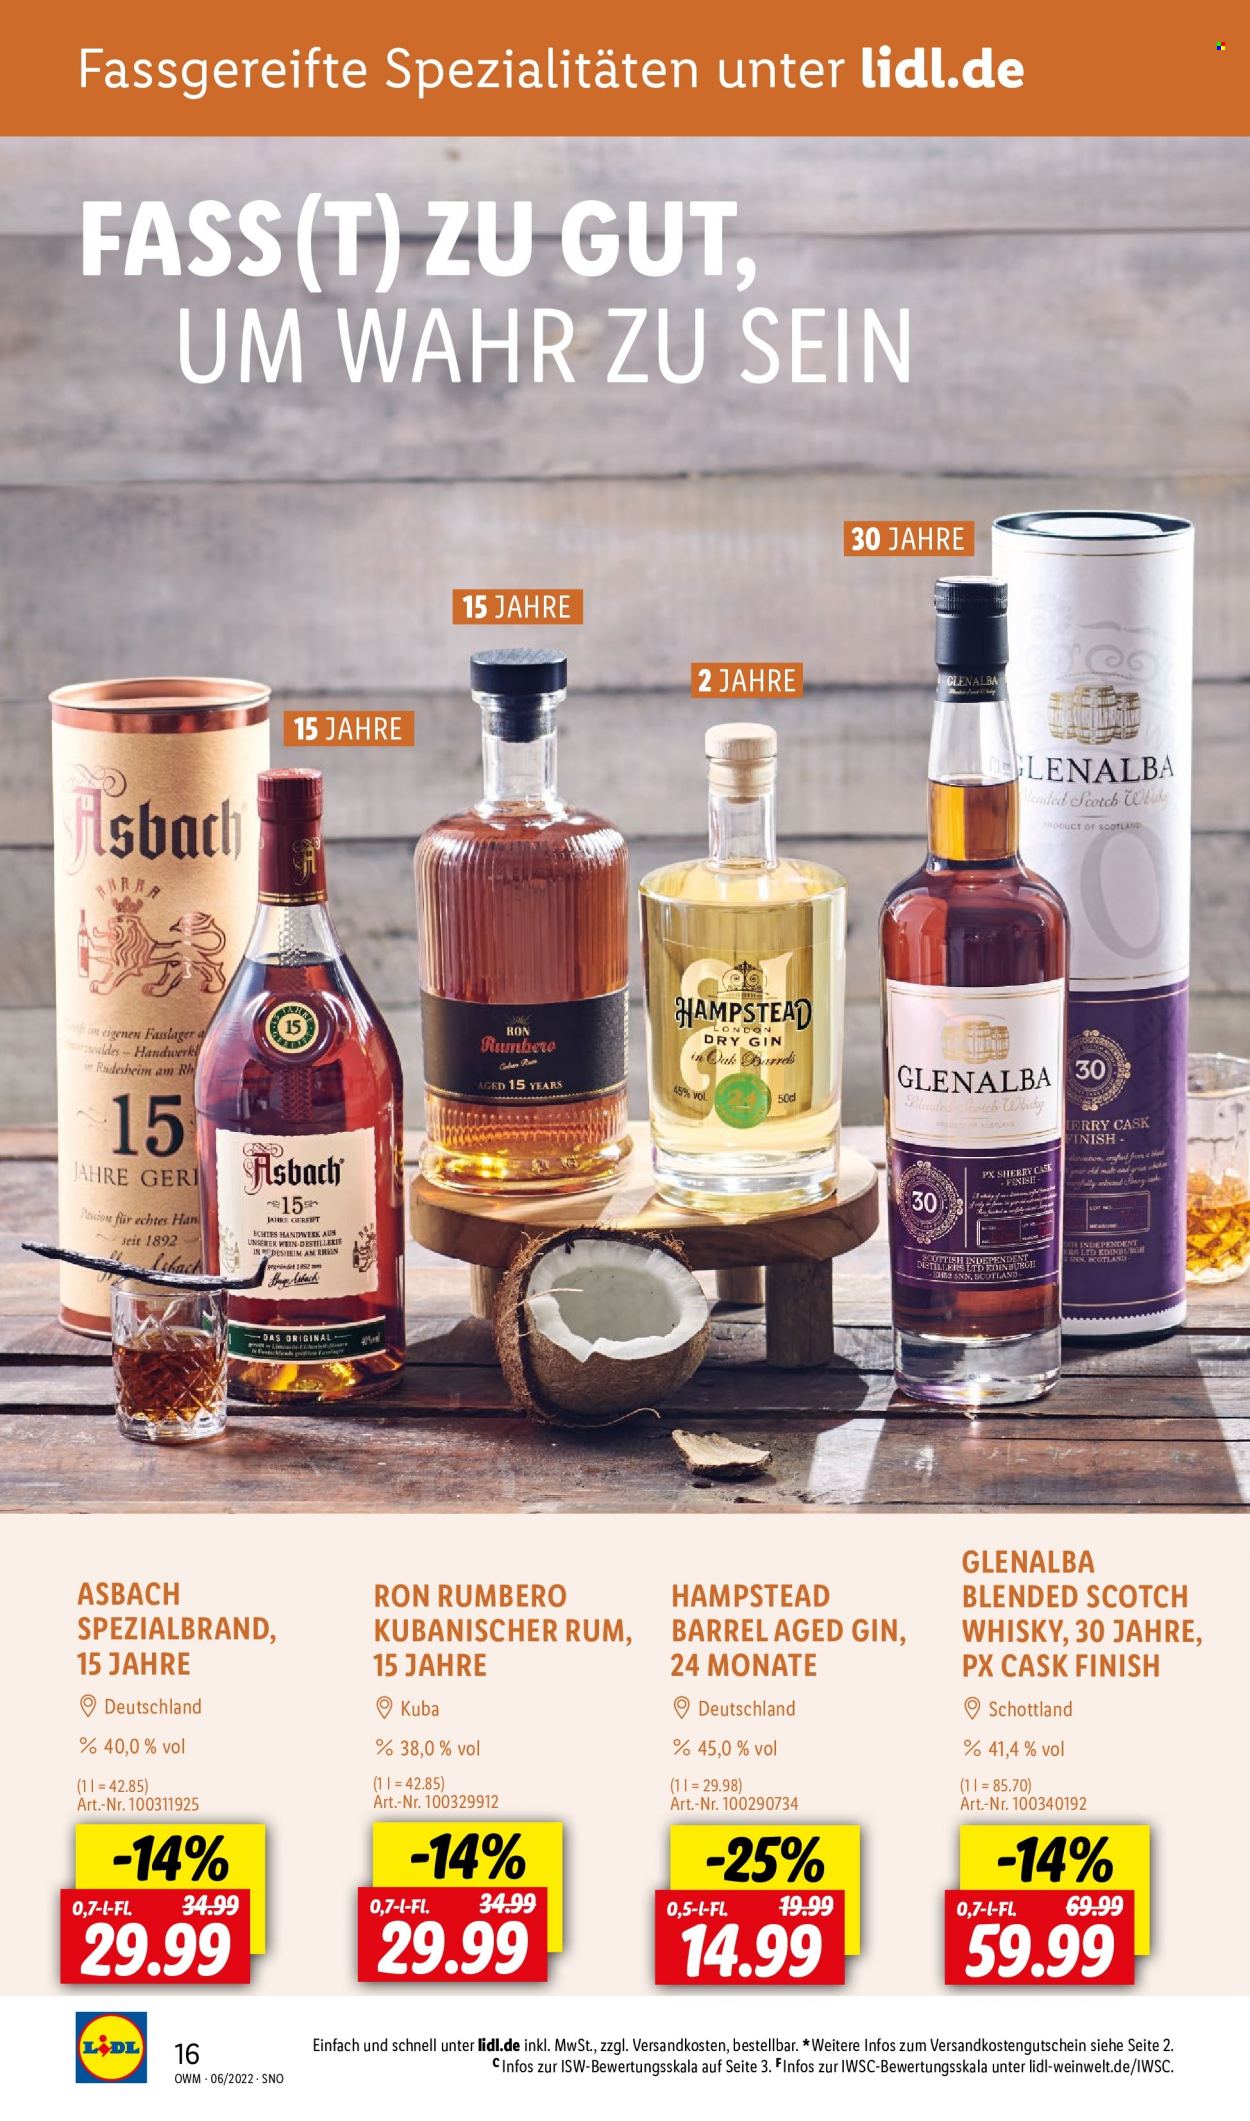 thumbnail - Prospekte Lidl - 1.06.2022 - 30.06.2022 - Produkte in Aktion - Alkohol, Wein, Blended Scotch Whisky, Whiskey, Scotch Whisky, Gin, Rum, Finish, Fa. Seite 16.